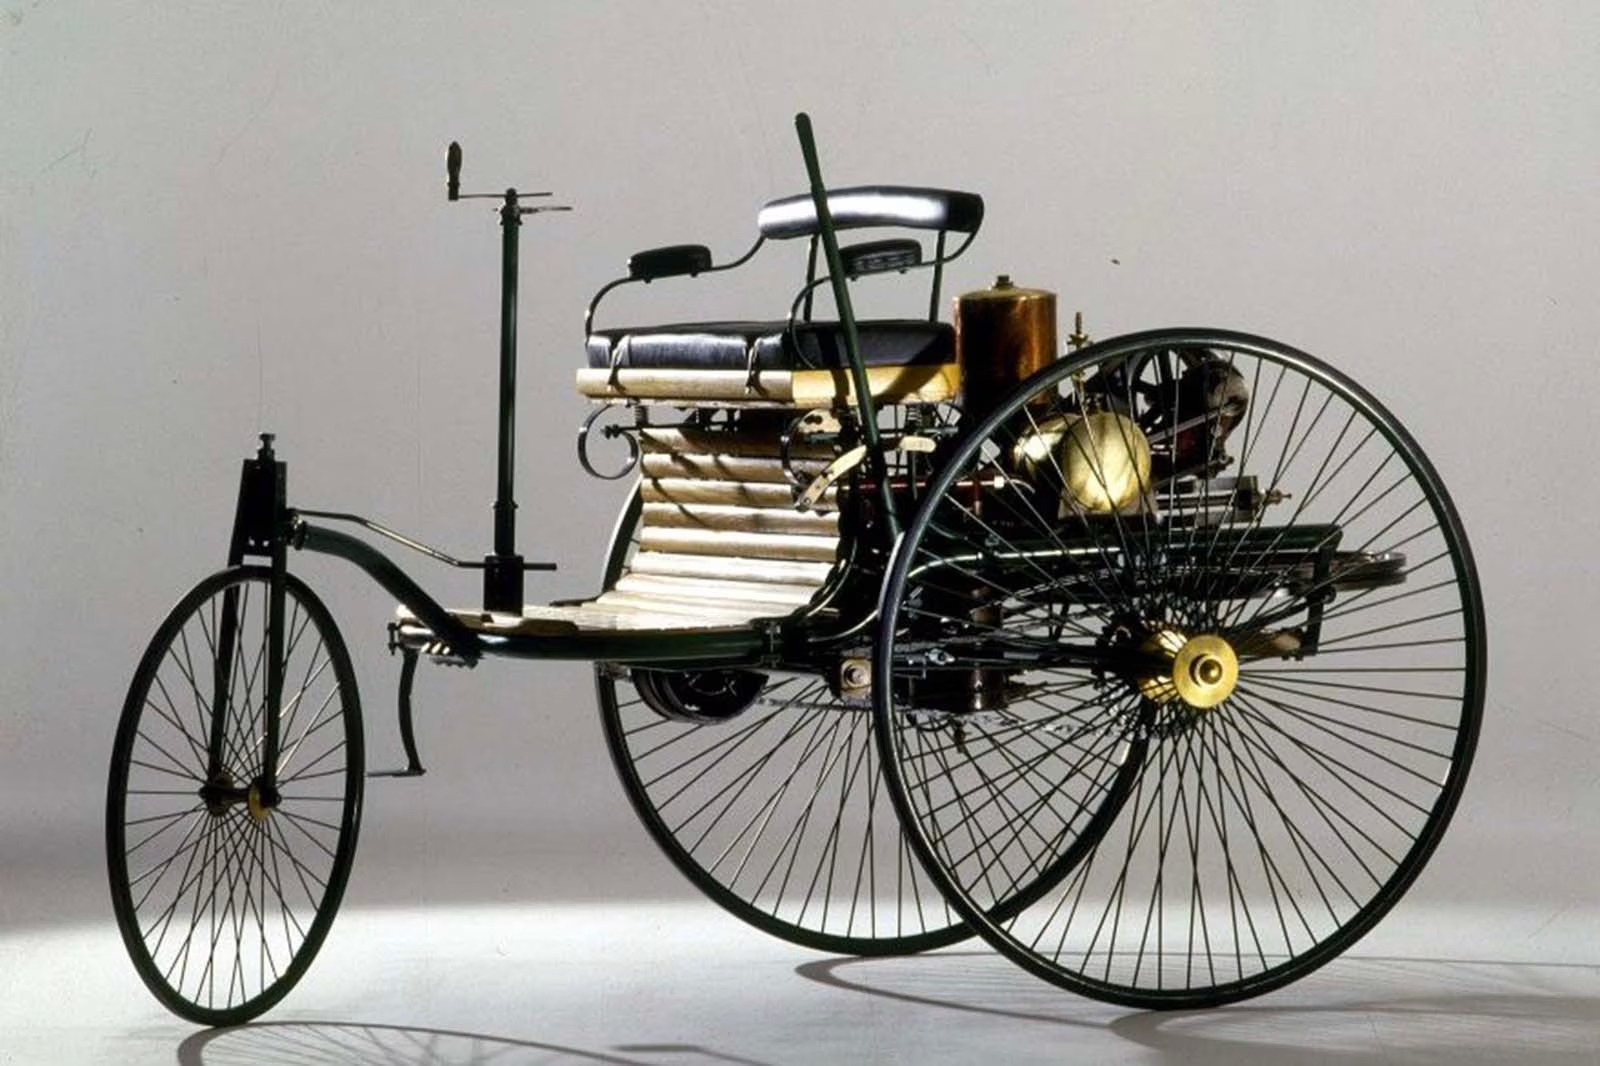 Carl Benz Unveiled the Patent-Motorwagen, the World's First Car, 138 Years Ago